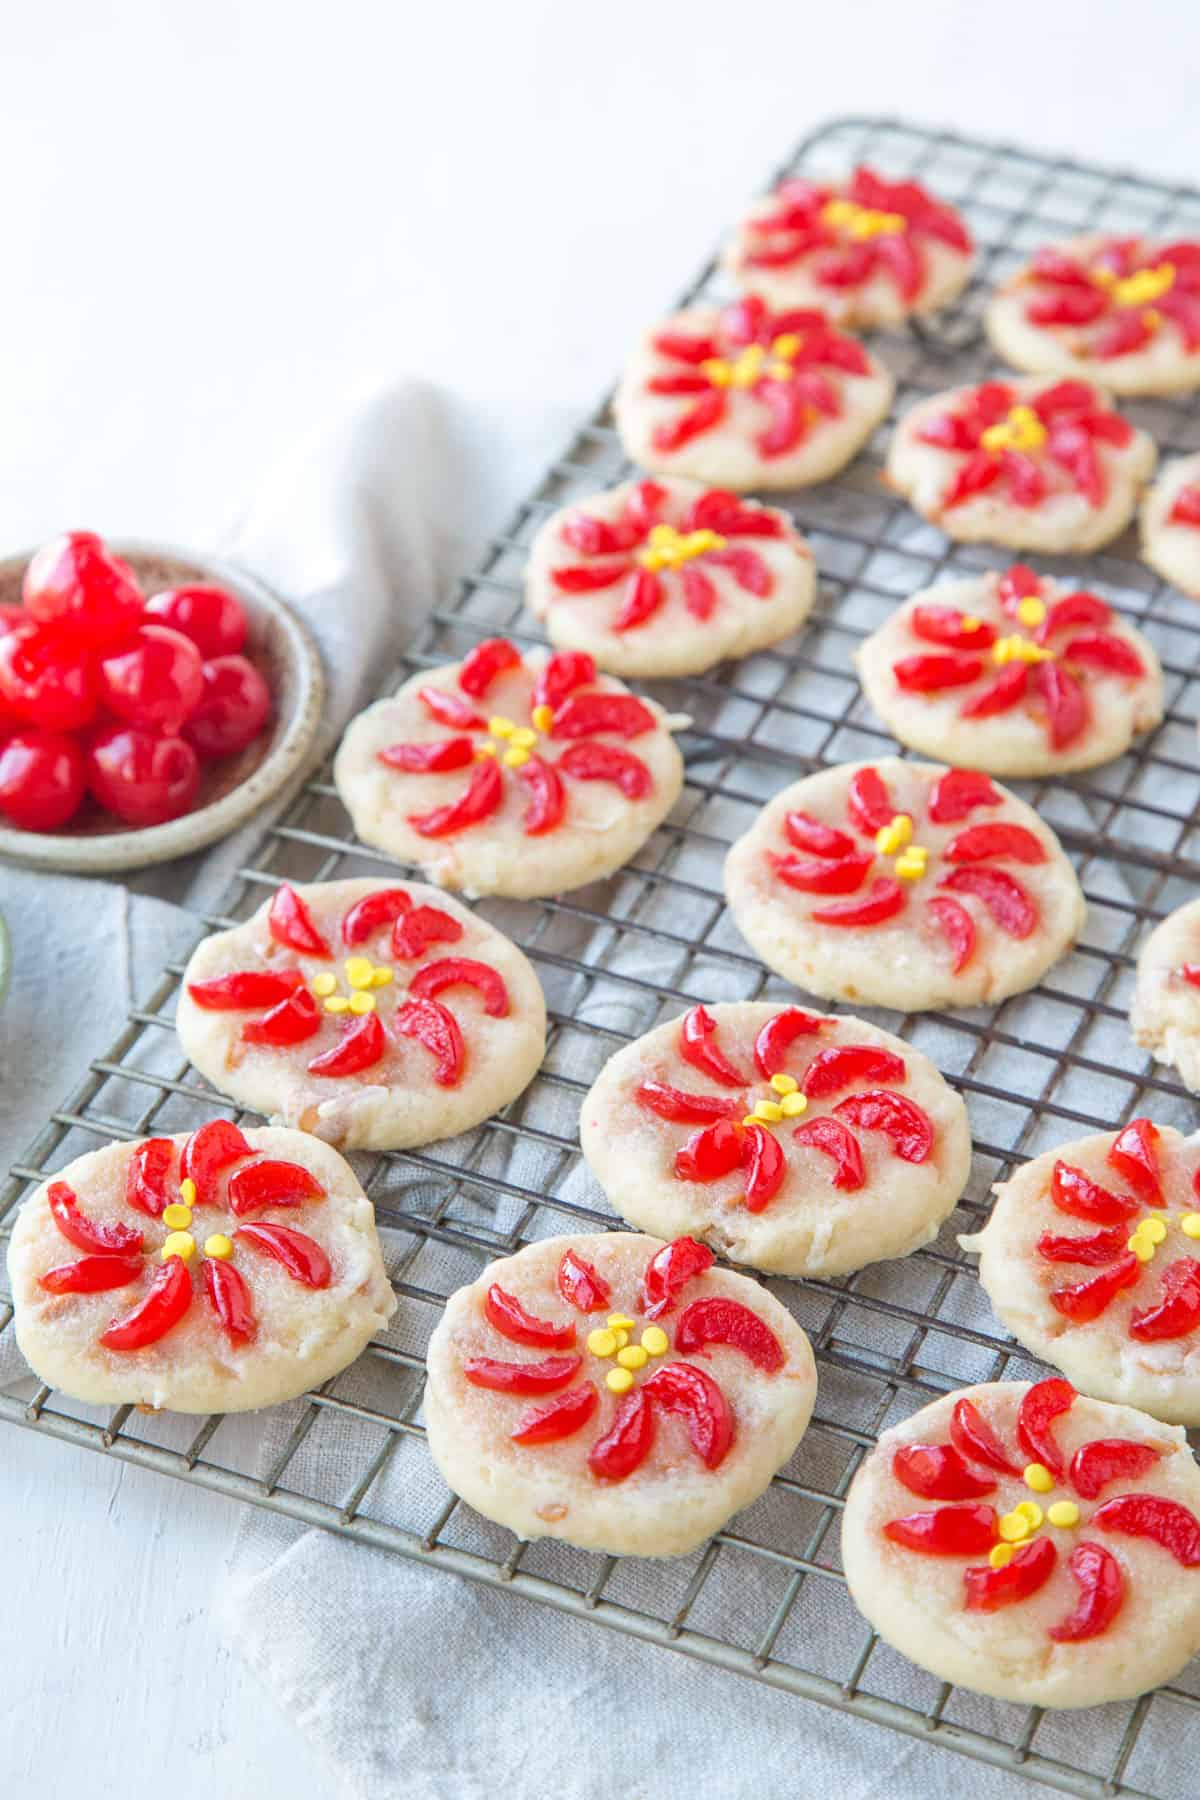 round beige cookies decorated with sliced maraschino cherries and sprinkles to resemble poinsettias, on a wire rack.